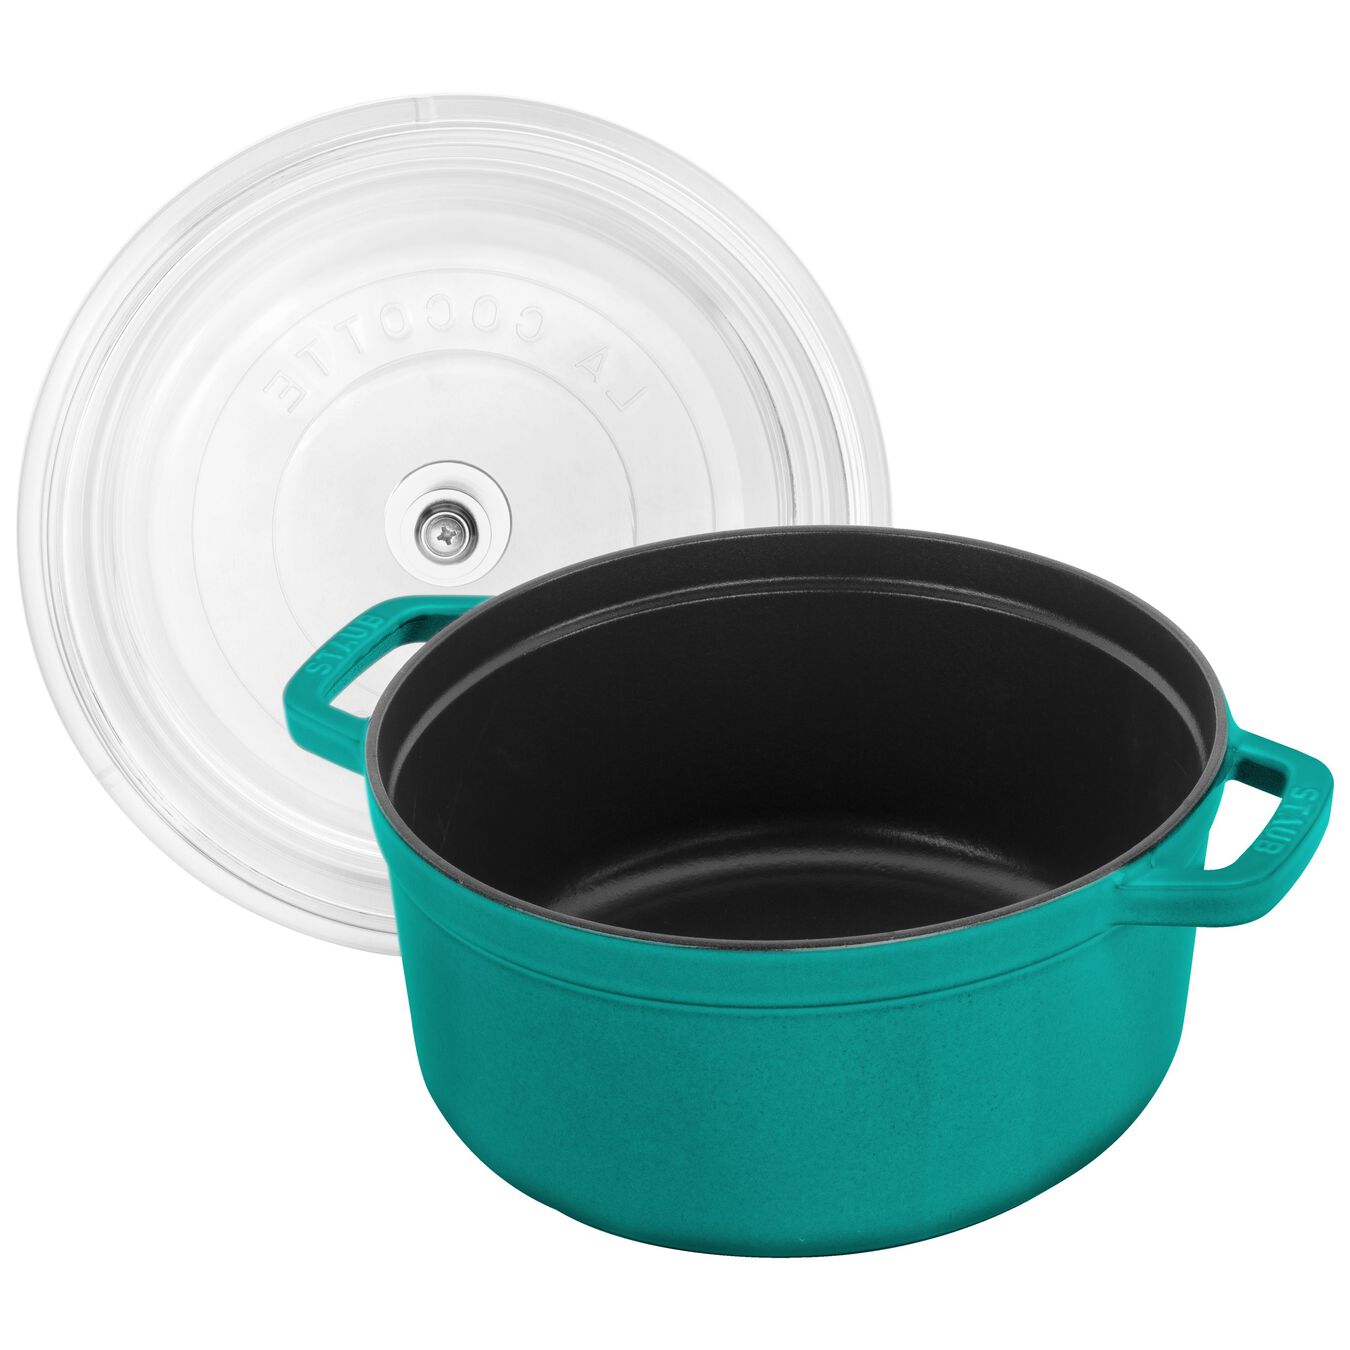 4 qt, round,  Glass Lid Cocotte, turquoise,,large 2